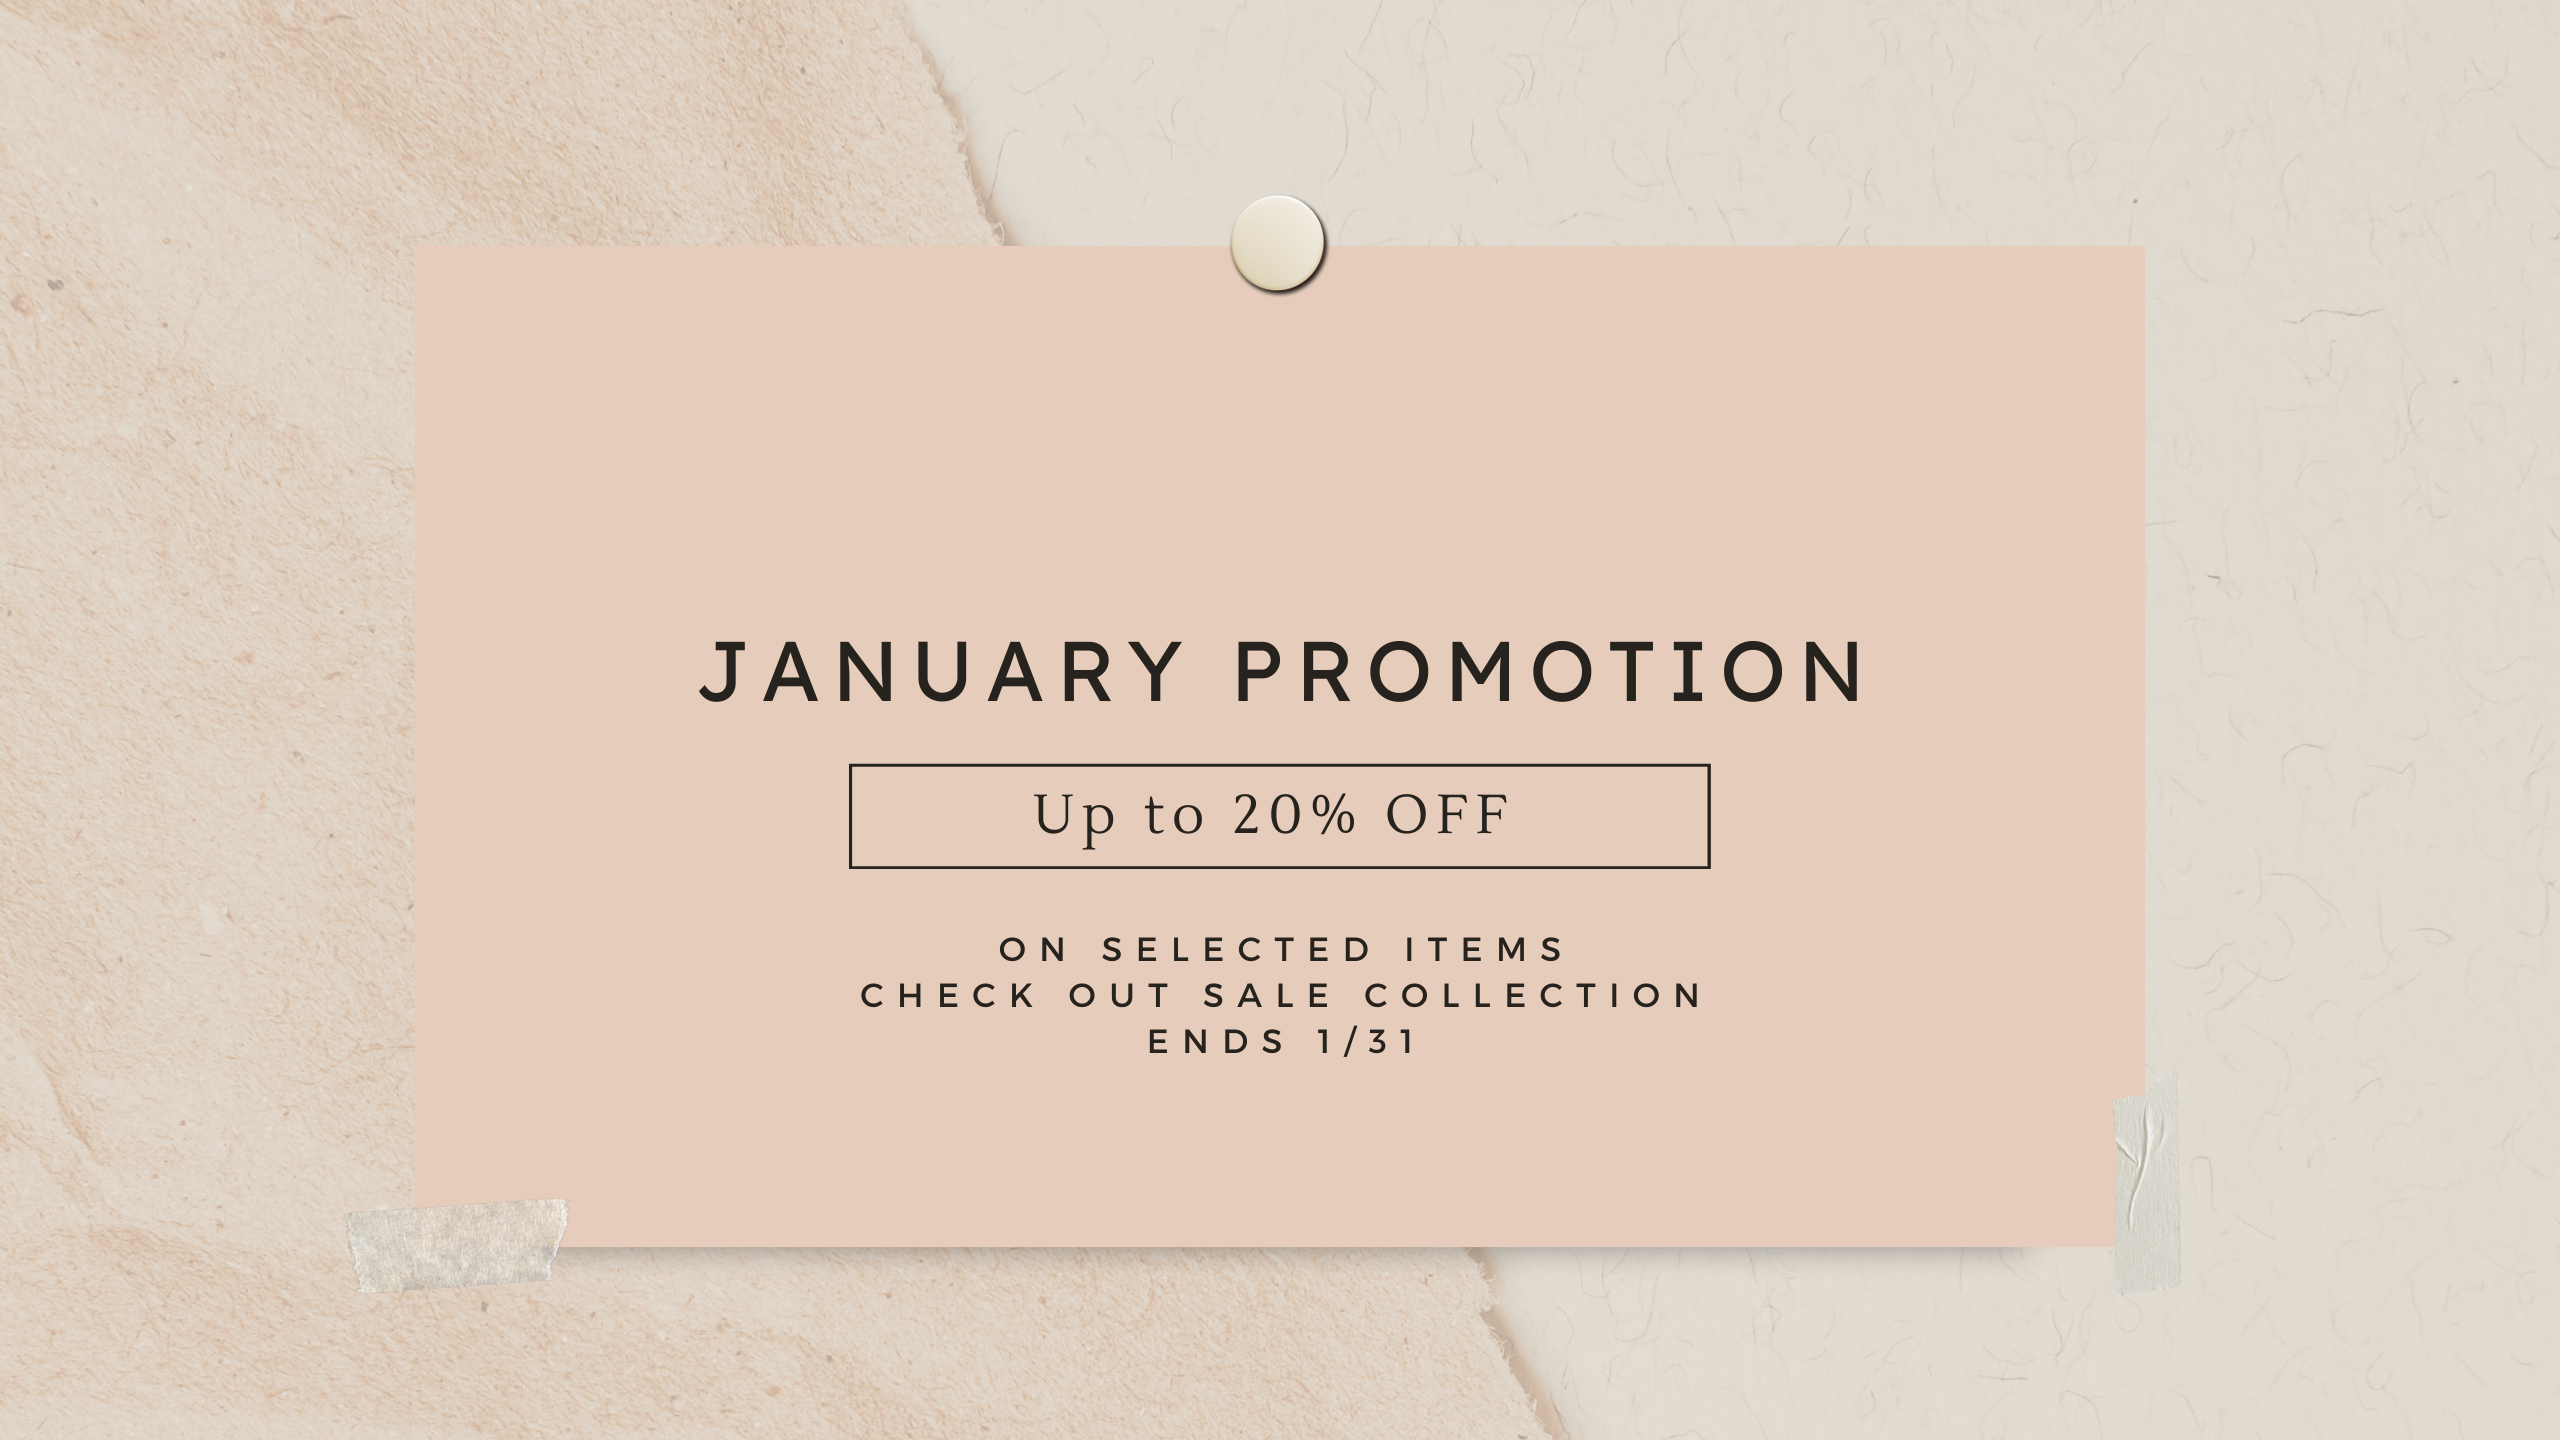 January Promotion Alert! Up to 20% OFF on Selected Items - Shop Now!